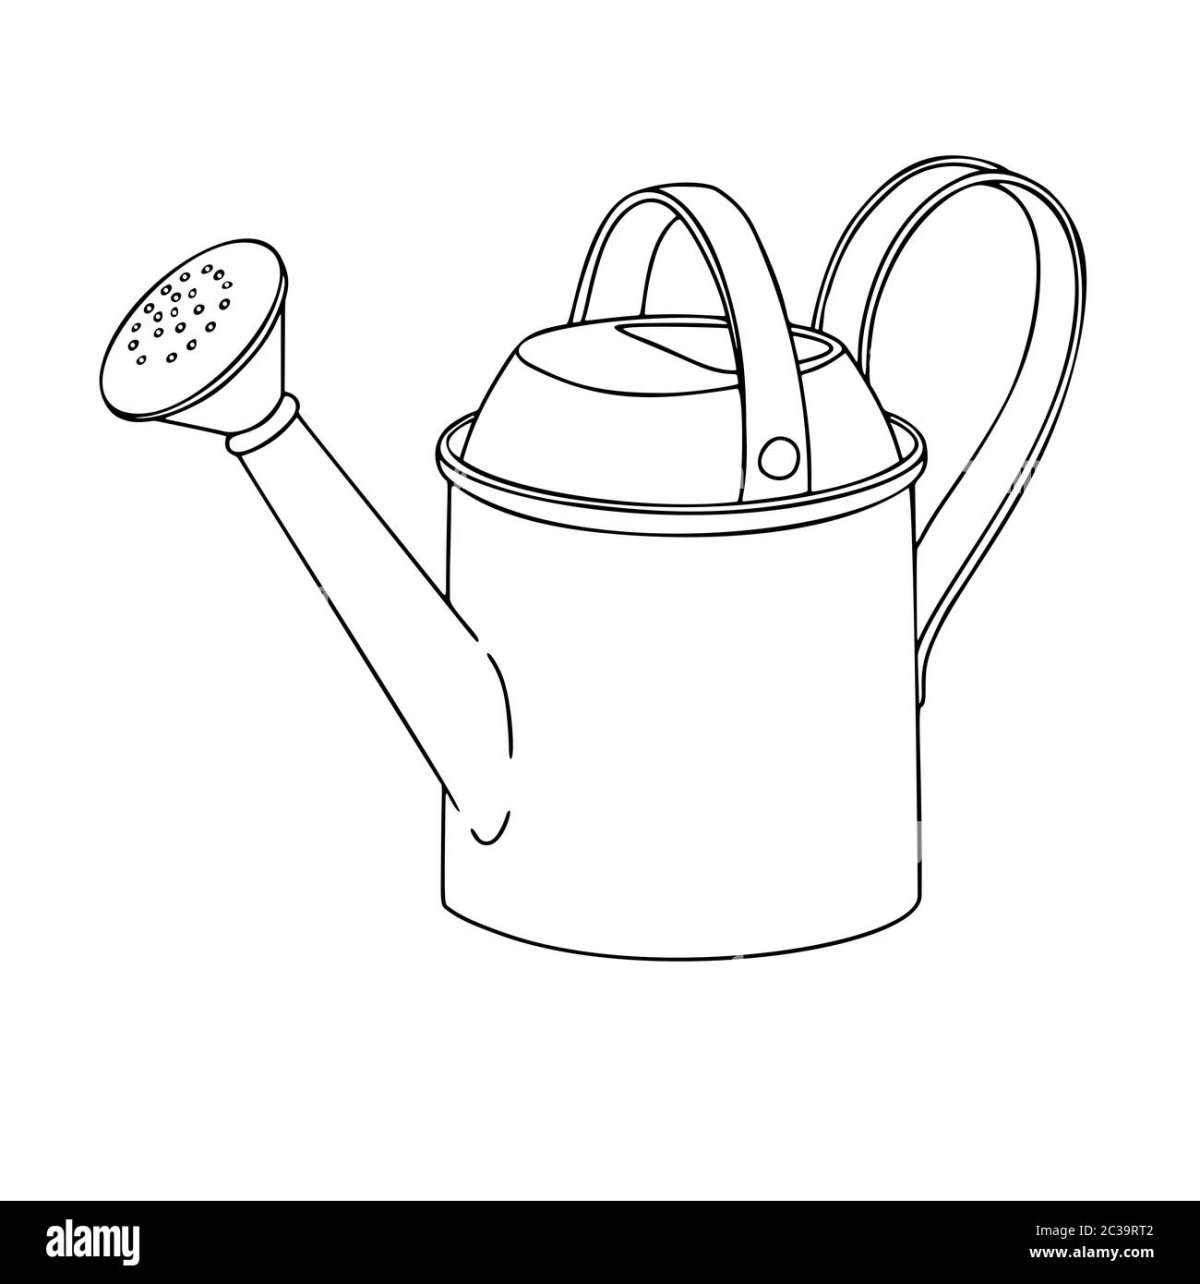 Amazing watering can coloring book for kids